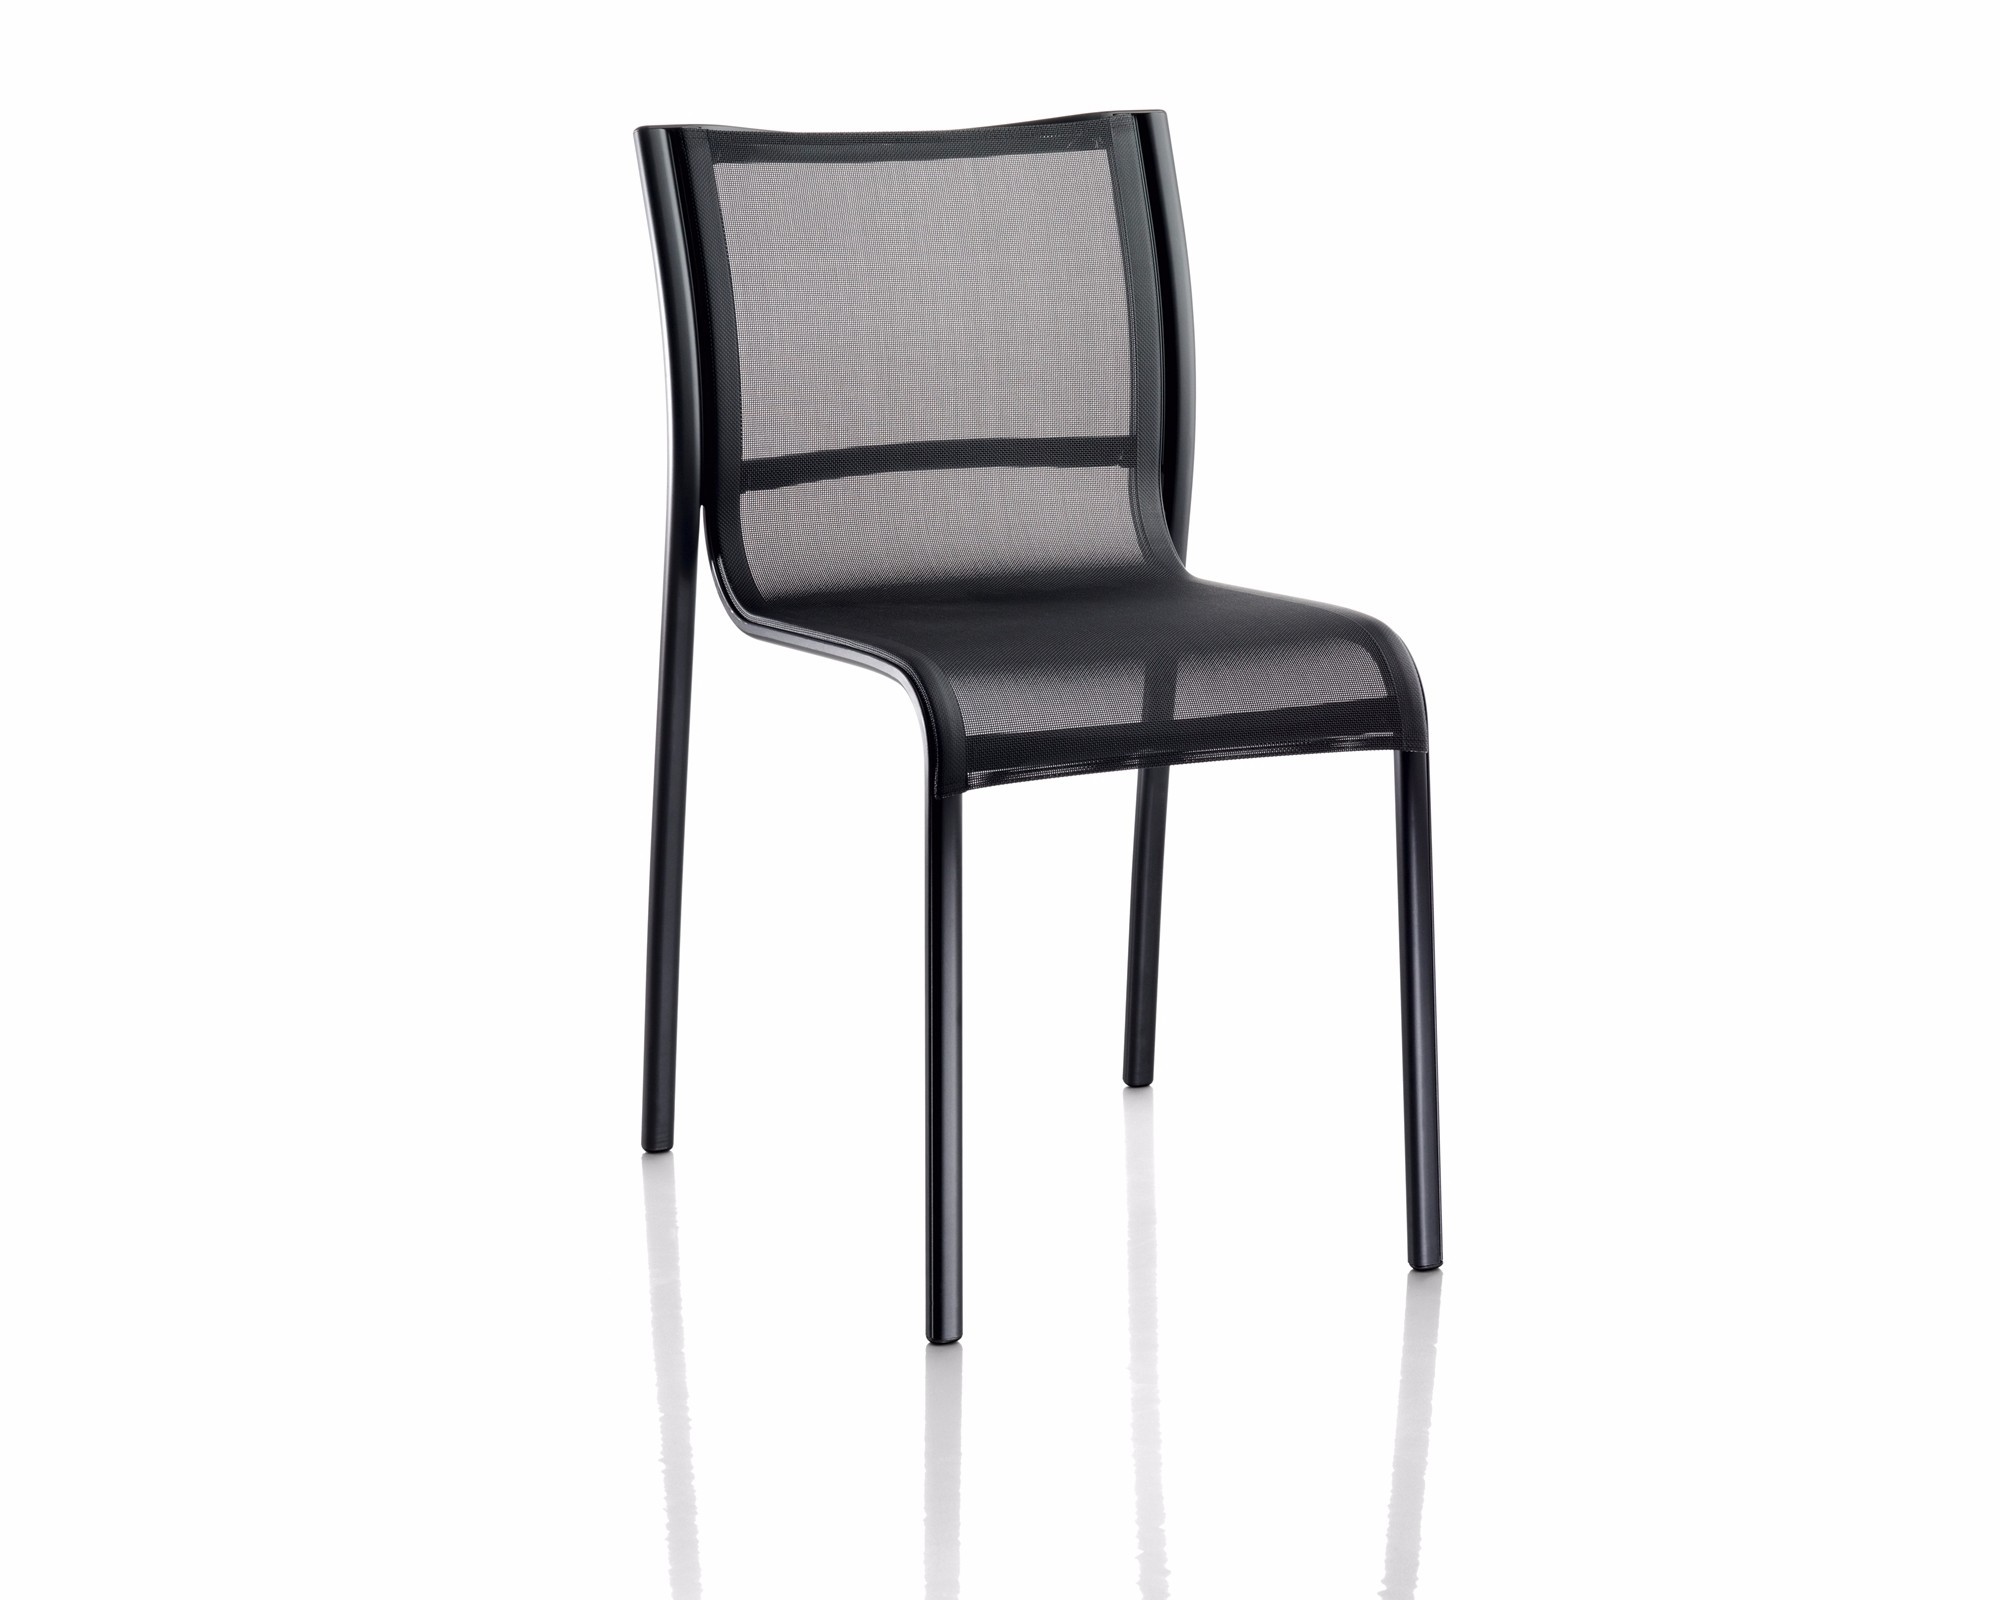 Paso Doble Dining Chair